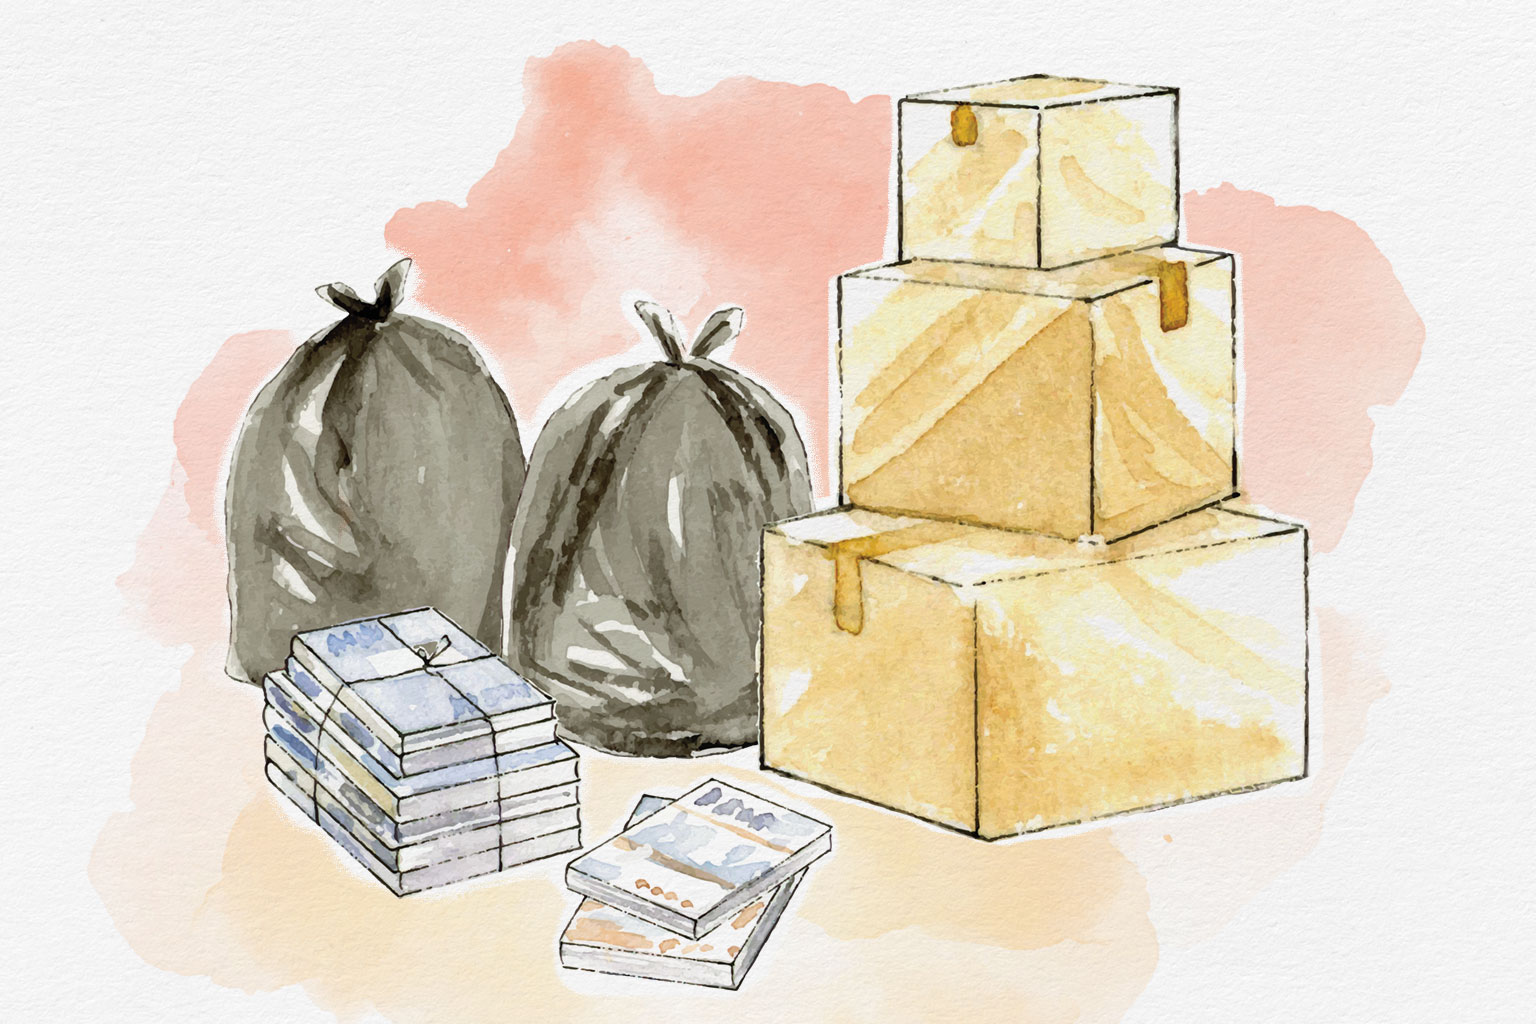 Cardboard boxes, garbage bags and used books painted by watercolor